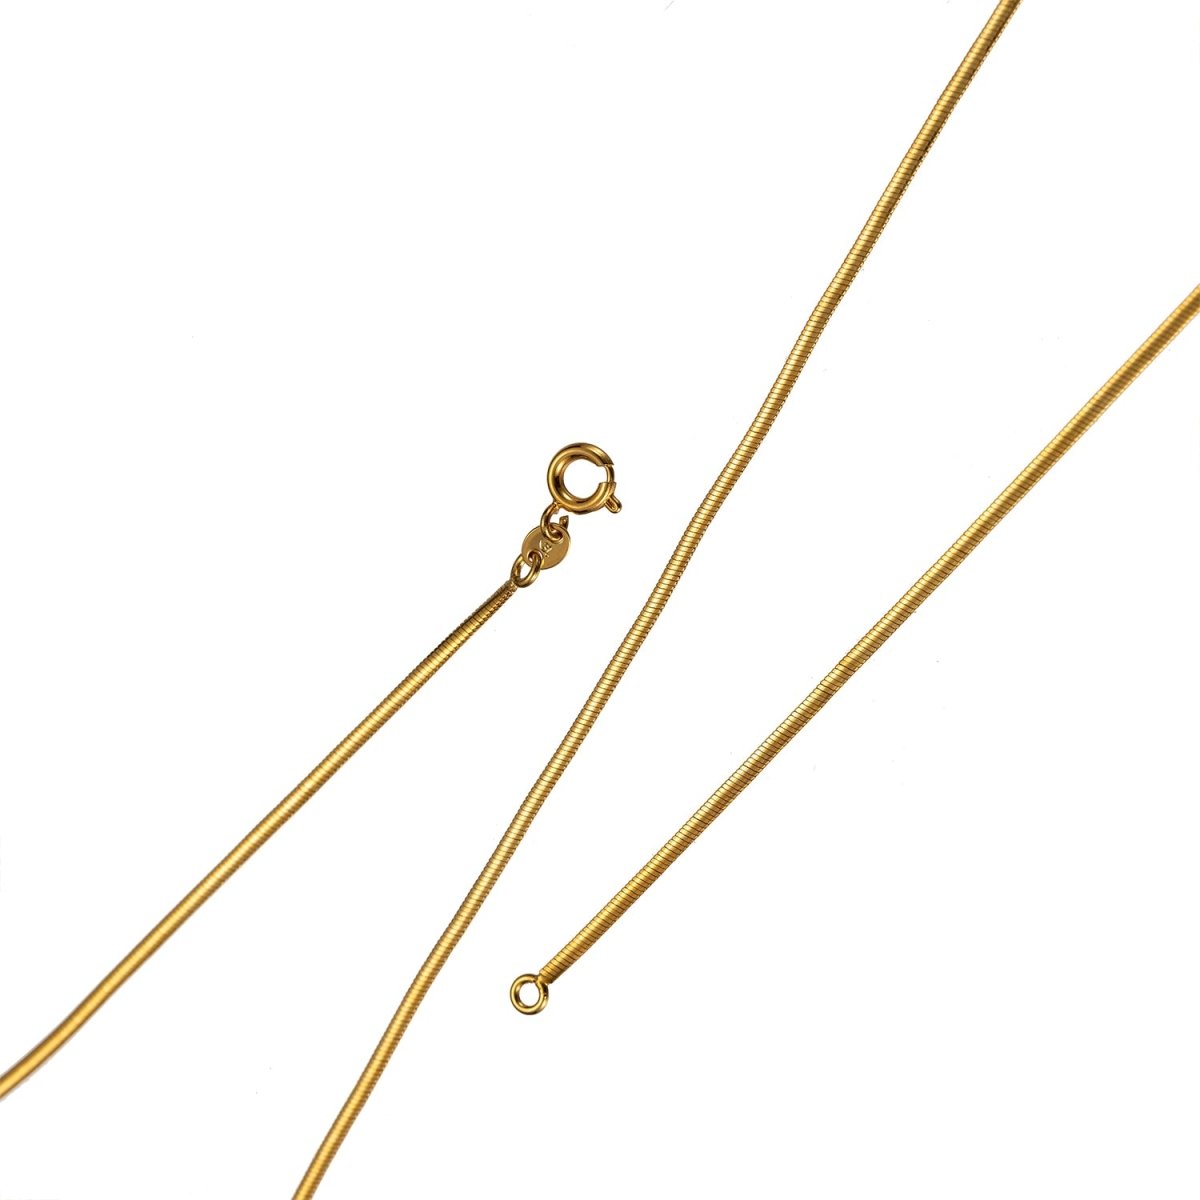 19.6 inch Cocoon Necklace Chain, 24K Gold Plated Finished Cocoon Necklace Chain, Dainty 1.5mm Cocoon Necklace w/ Spring Ring | CN-471 - DLUXCA